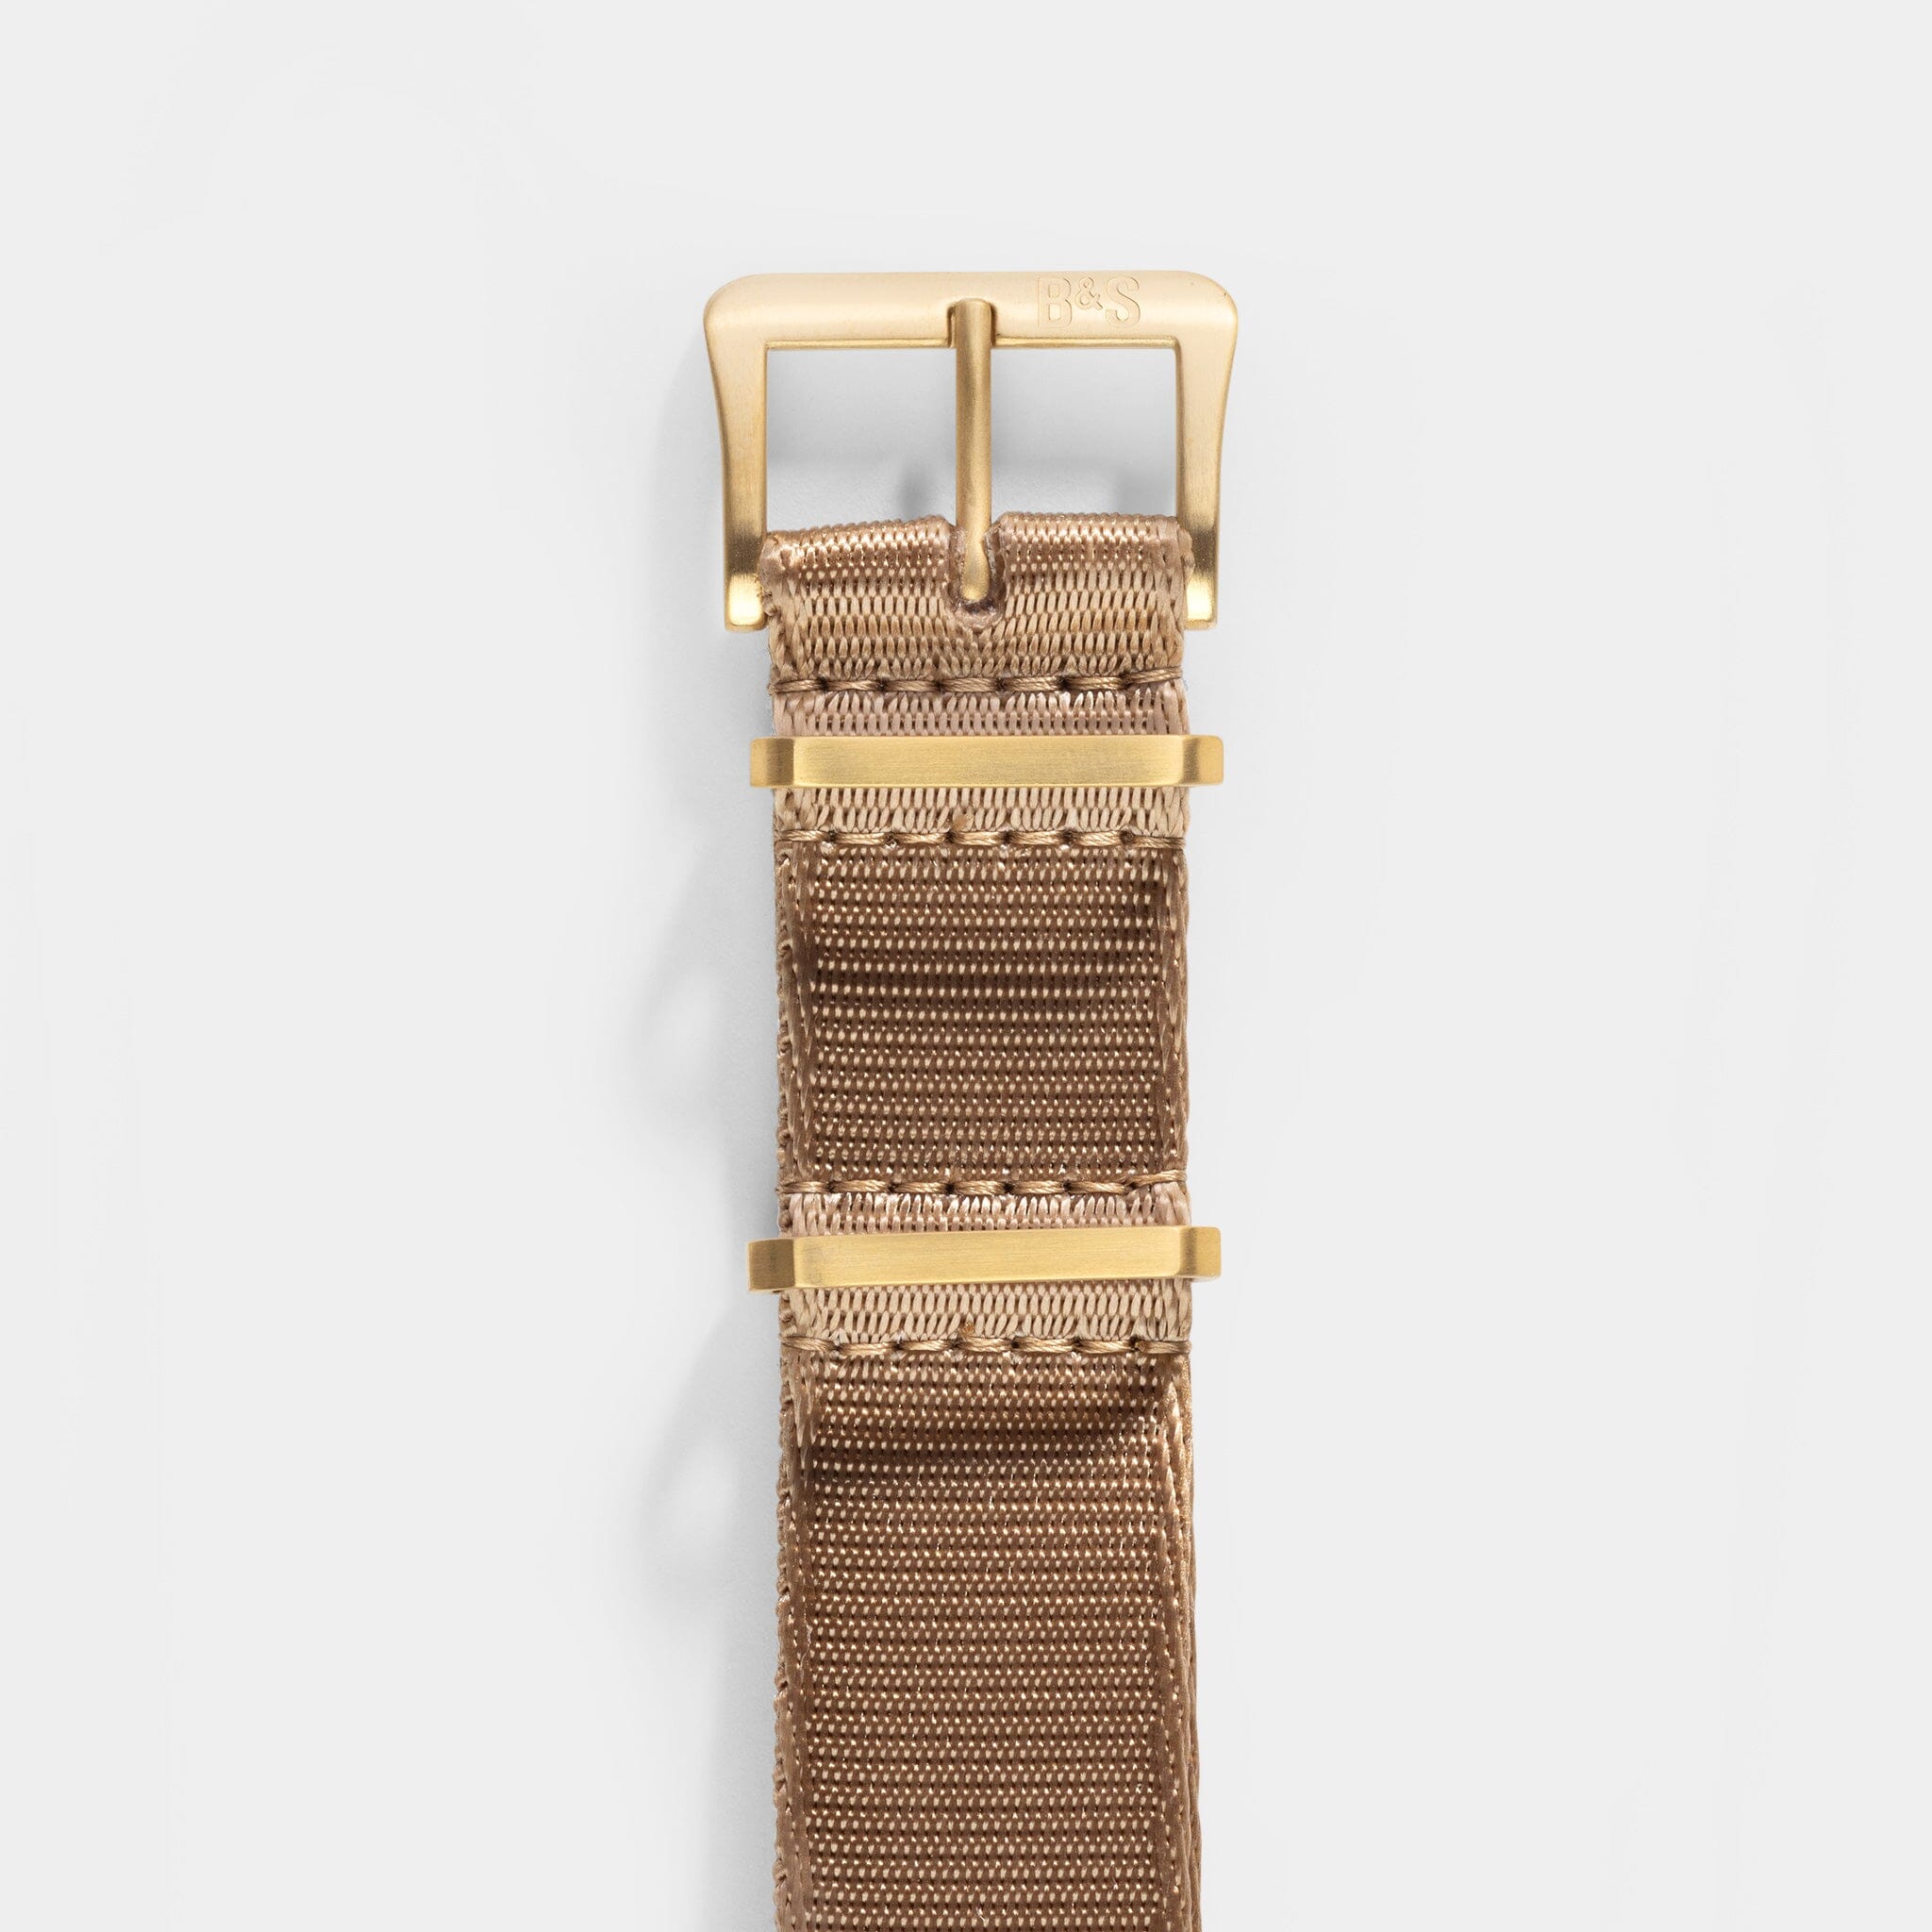 Deluxe Nylon Nato Watch Strap Coyote Brown - Gold Brushed